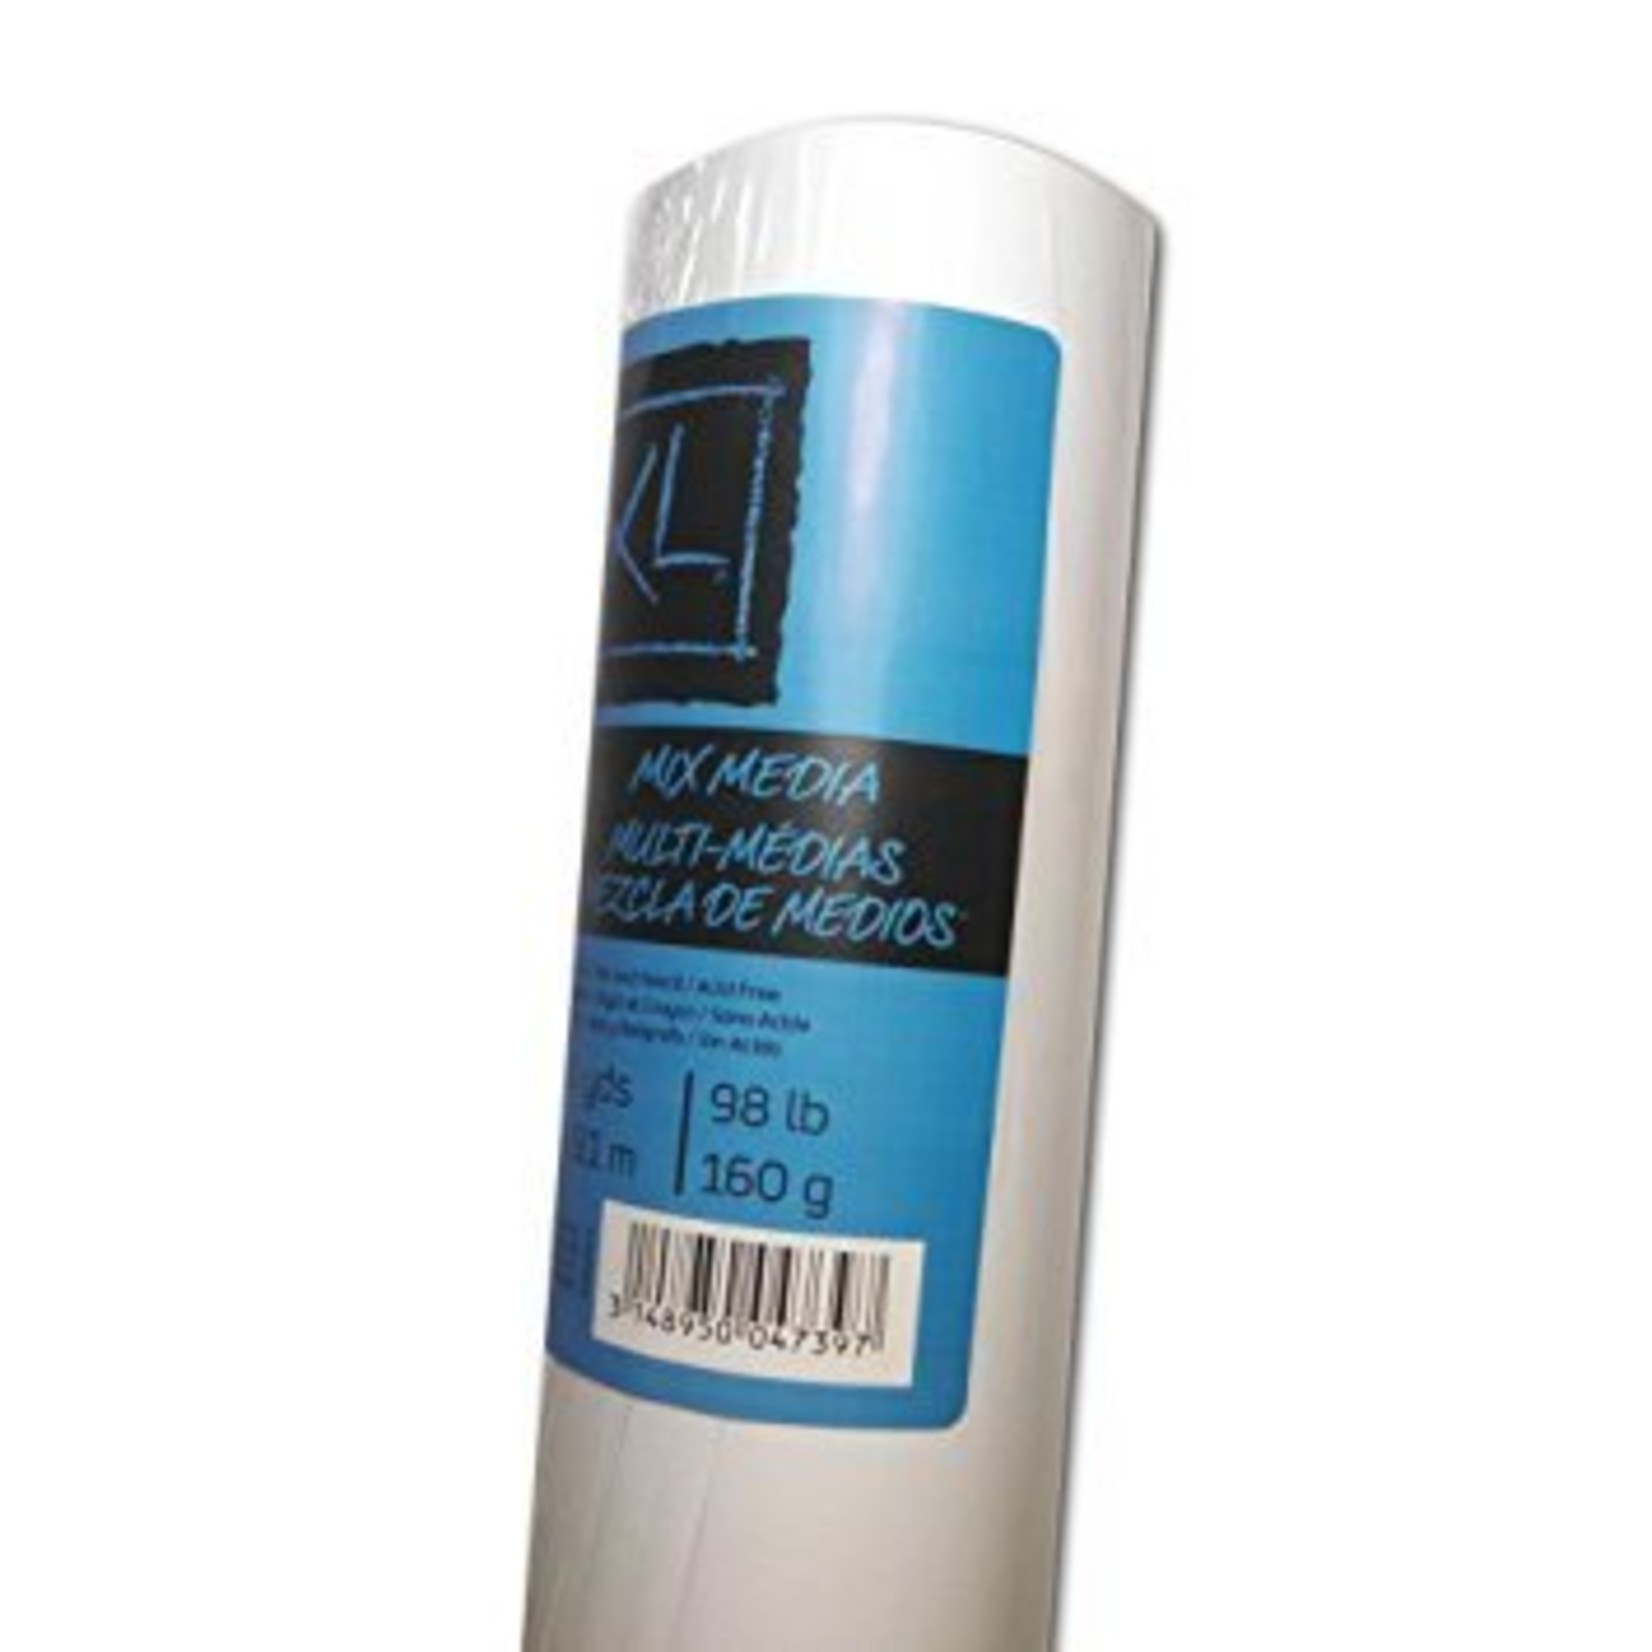 CANSON CANSON XL MIX MEDIA PAPER ROLL 98LB